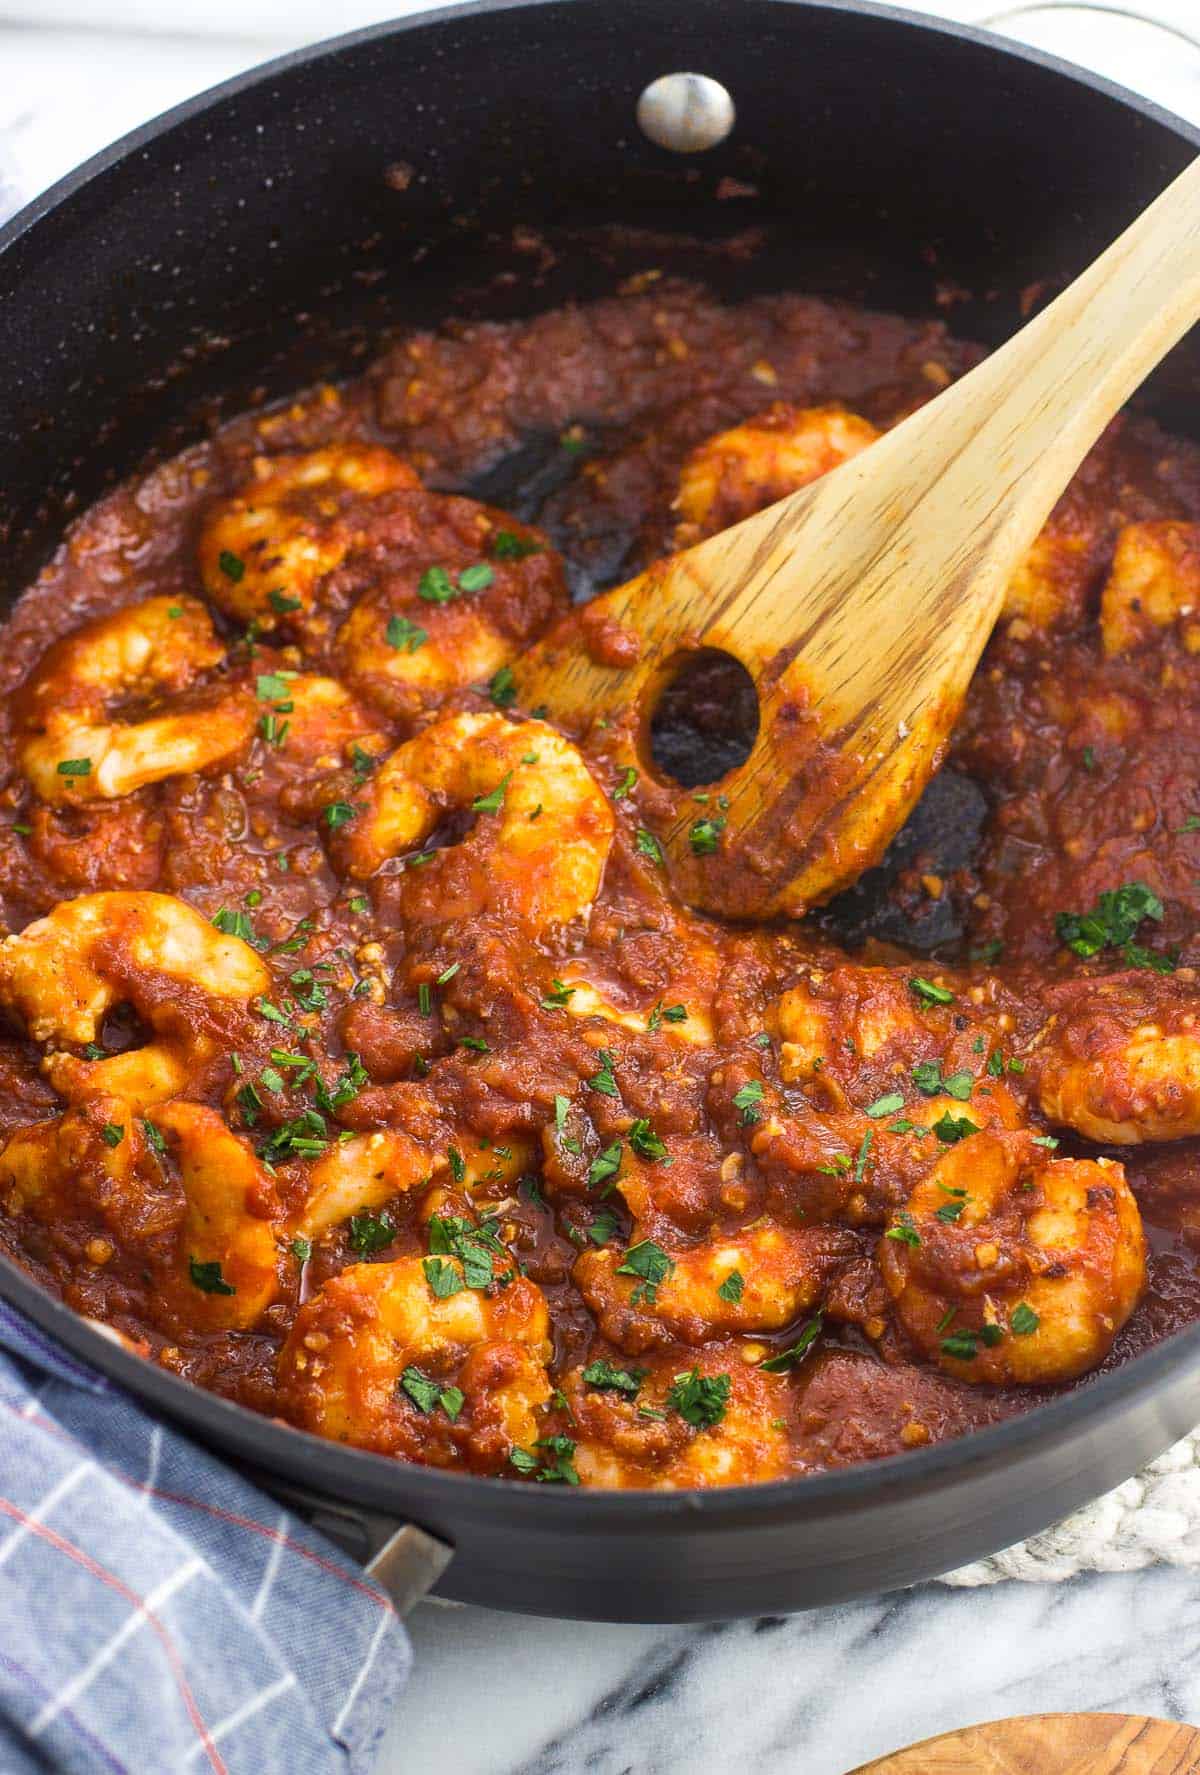 Cooked jumbo shrimp in fra diavolo sauce in a skillet garnished with fresh parsley.